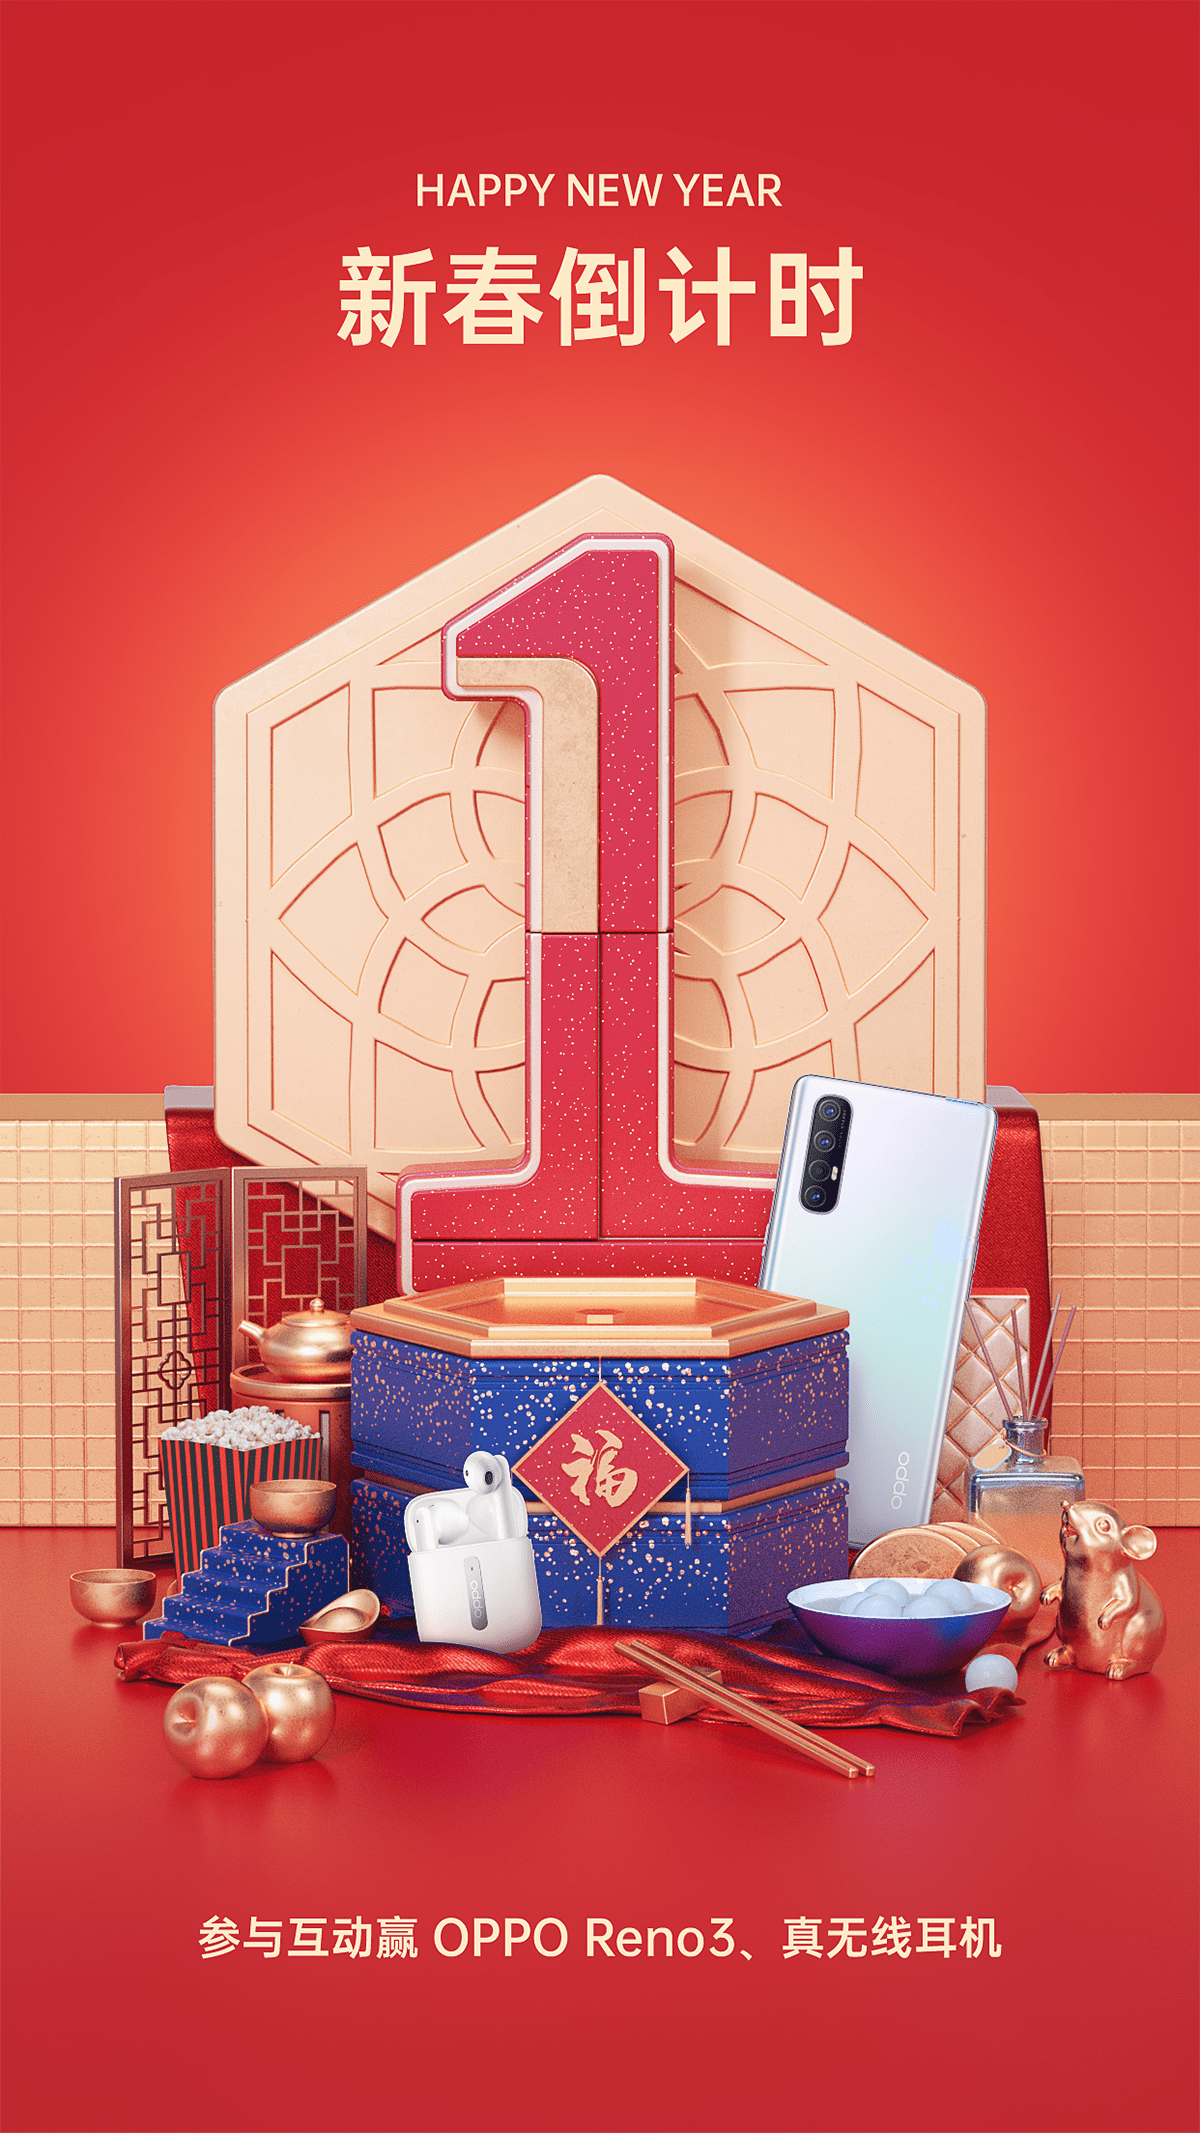 OPPO Happy Chinese New Year Countdown Poster on Behancebd147b91444031.5e32a2e116bd8.png